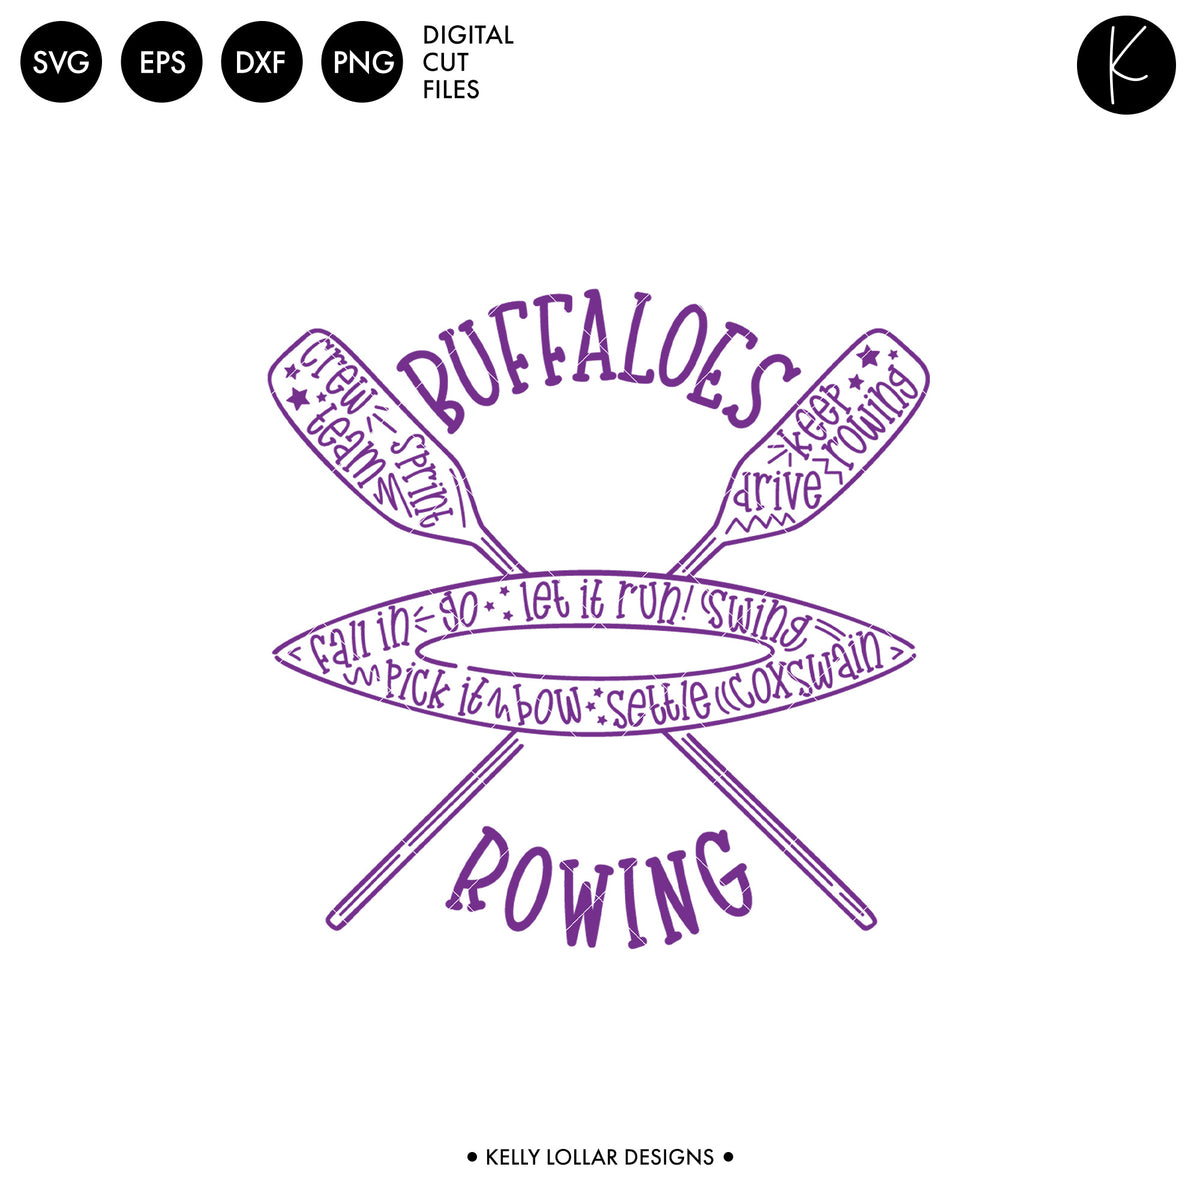 Buffaloes Rowing Crew Bundle | SVG DXF EPS PNG Cut Files